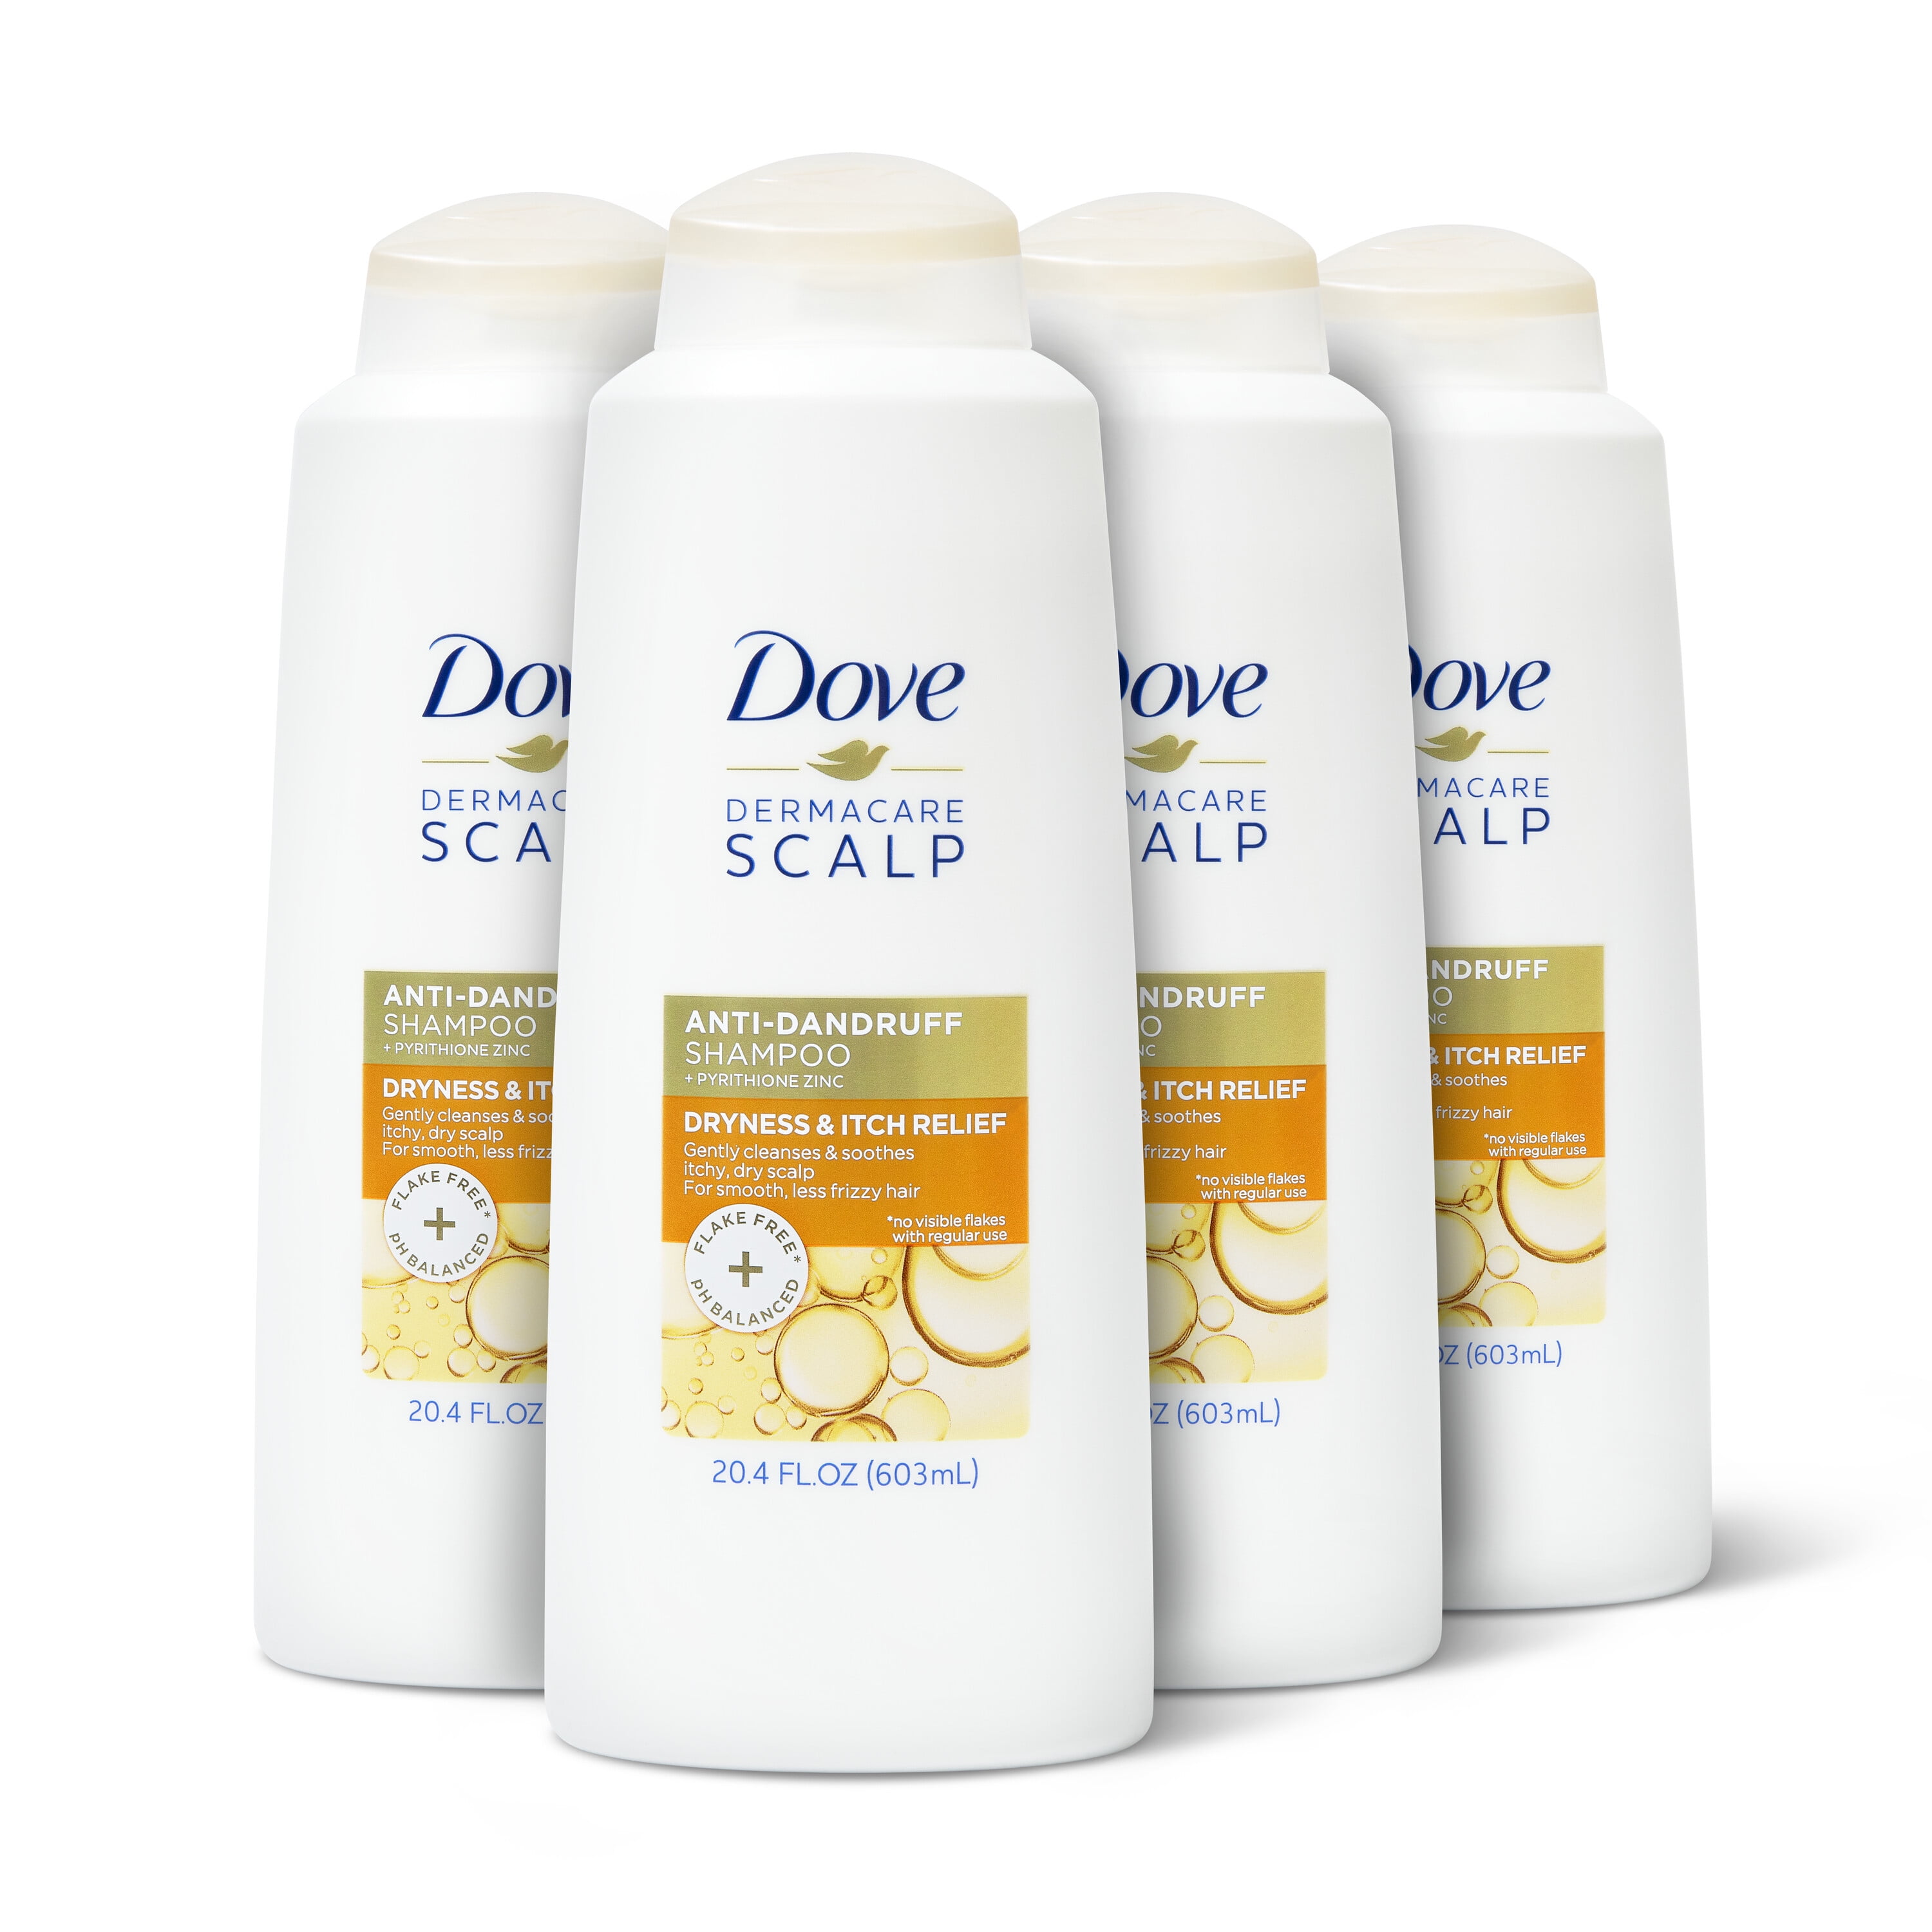 dove-dermacare-scalp-anti-dandruff-shampoo-for-dry-and-itchy-scalp-20-4